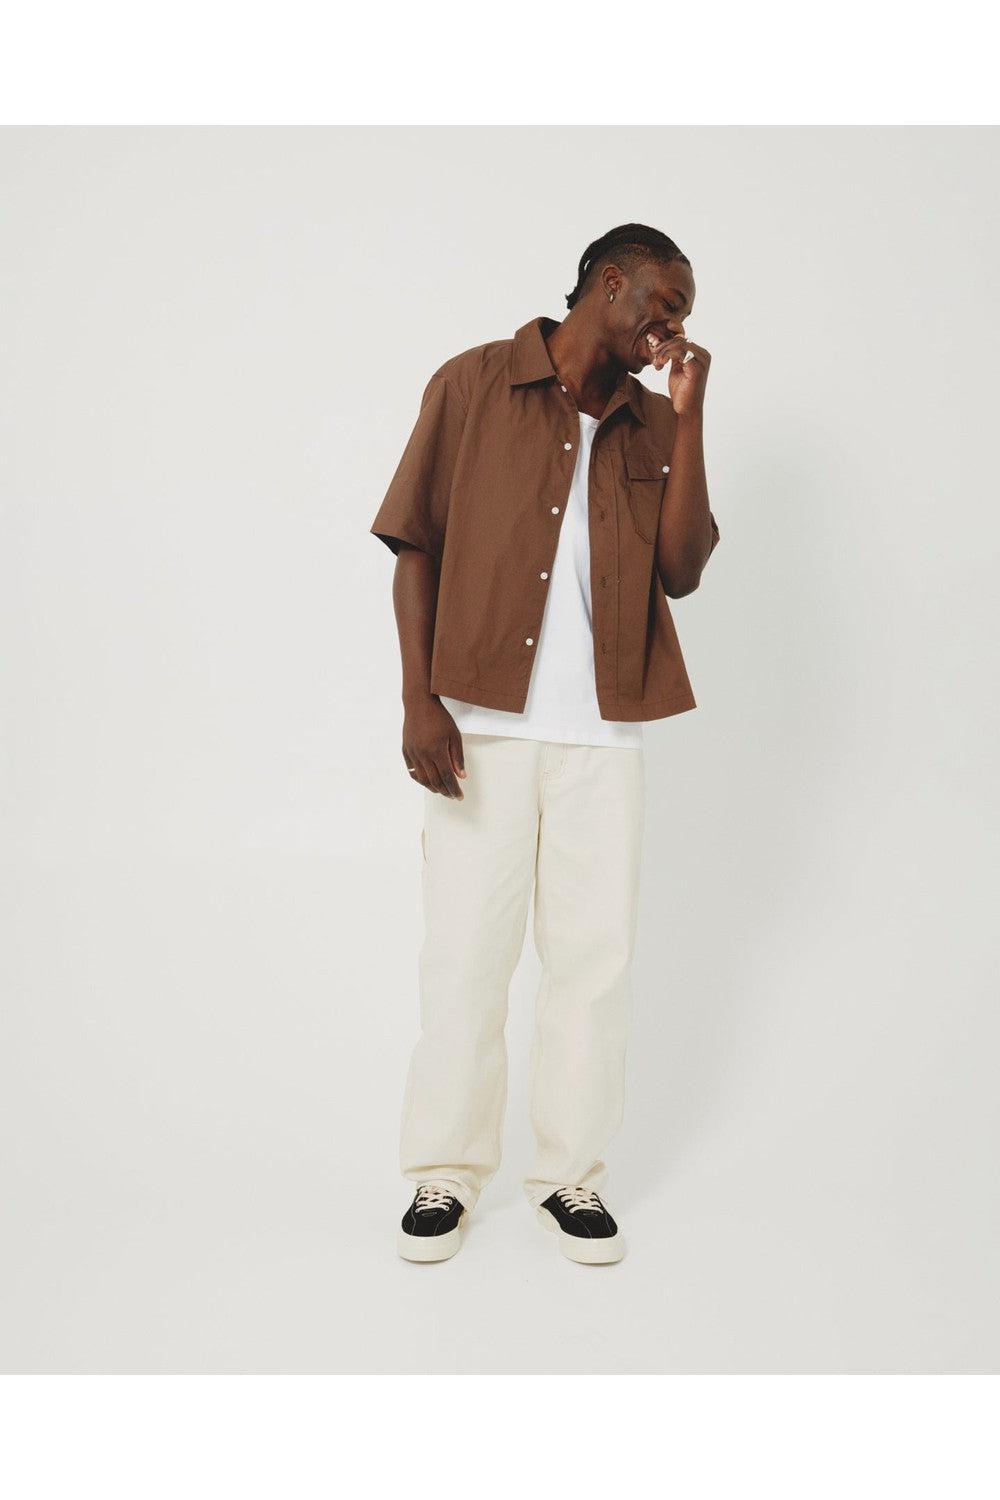 Commoners Mens Box Fit Shirt - Cocoa | COMMONERS | Mad About The Boy